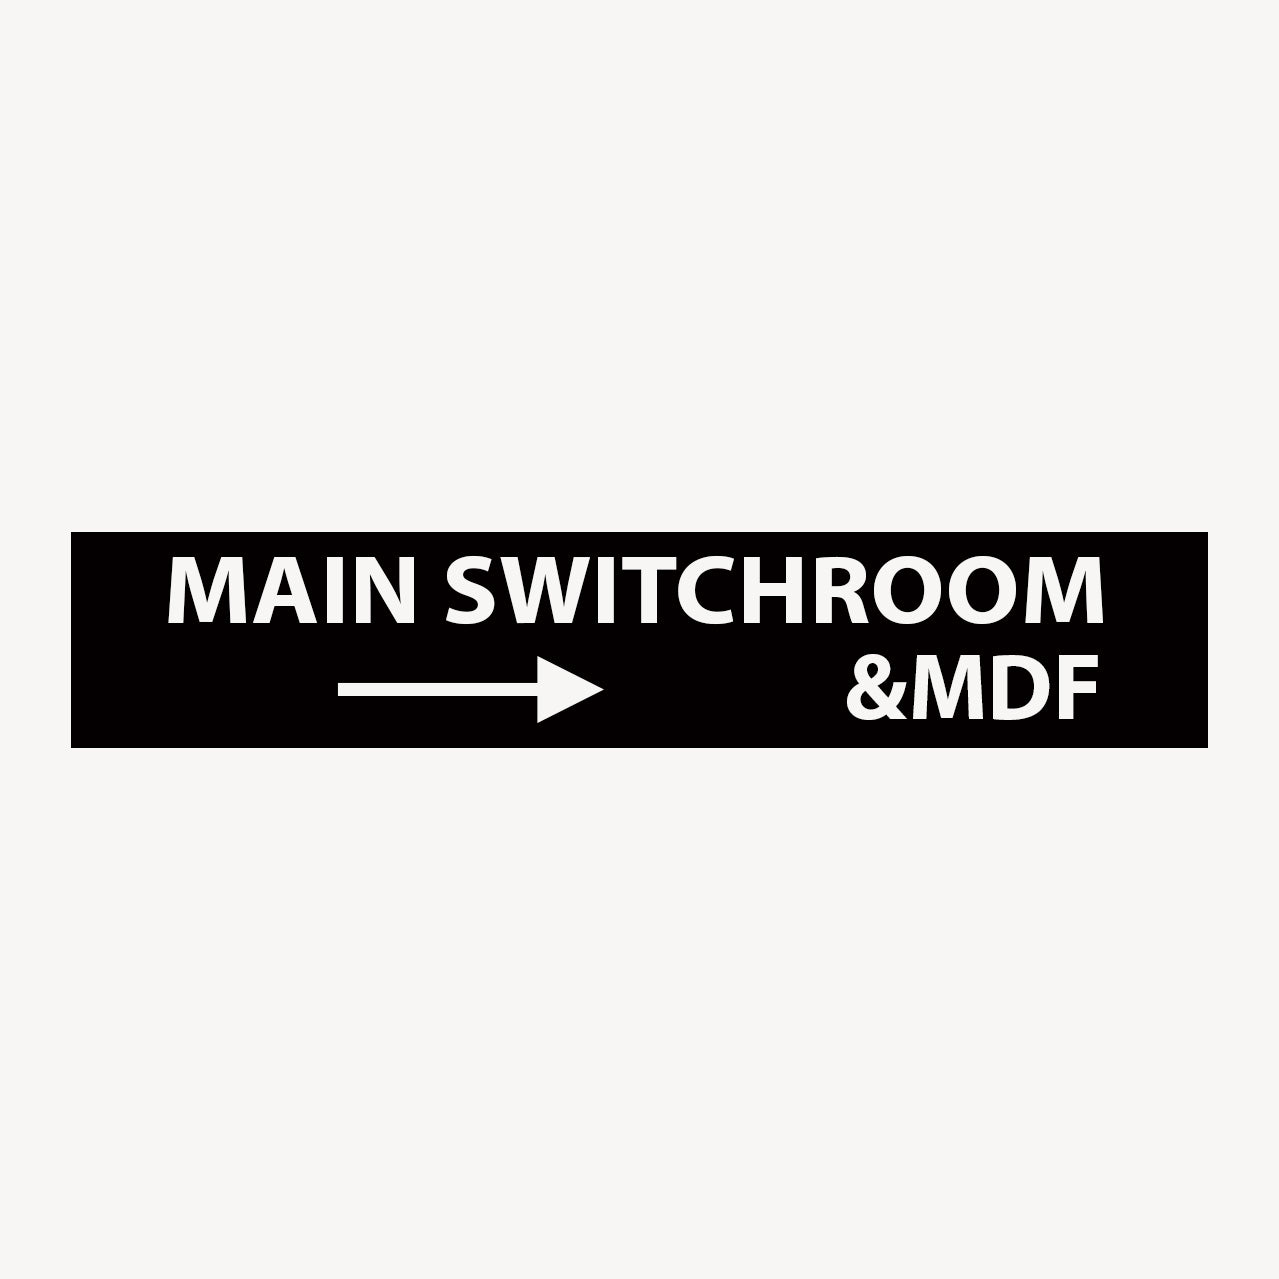 MAIN SWITCHROOM & MDF Right Arrow SIGN